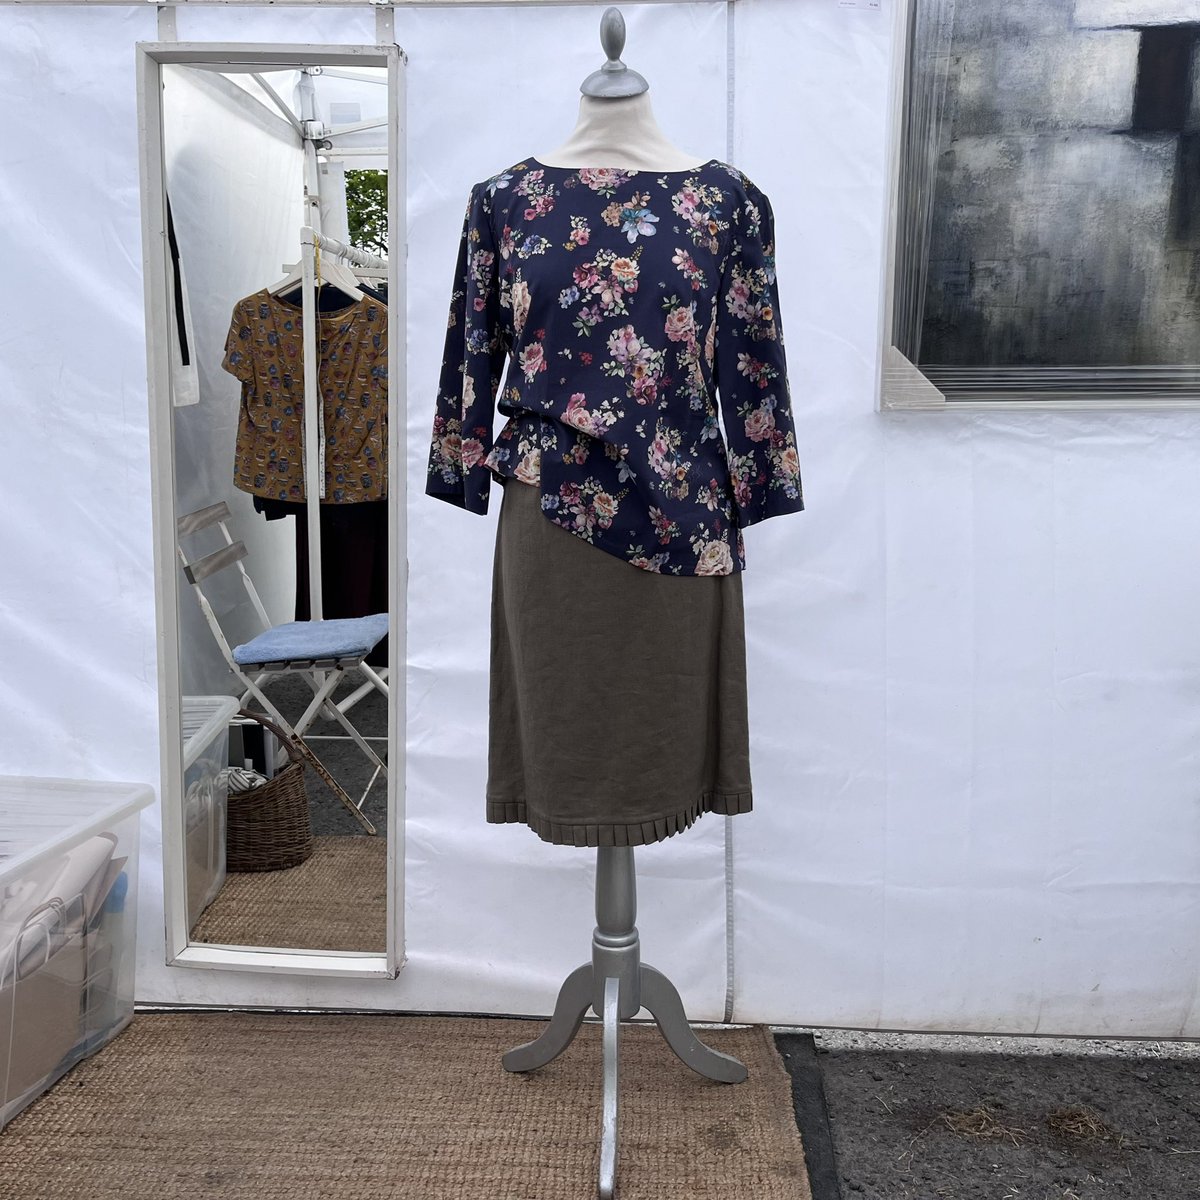 Inky floral Janet blouse this time paired with the khaki Irish linen Aoife skirt.
Schull Country Market 
#womenswear #irishmade 
#slowmade #modernartisan